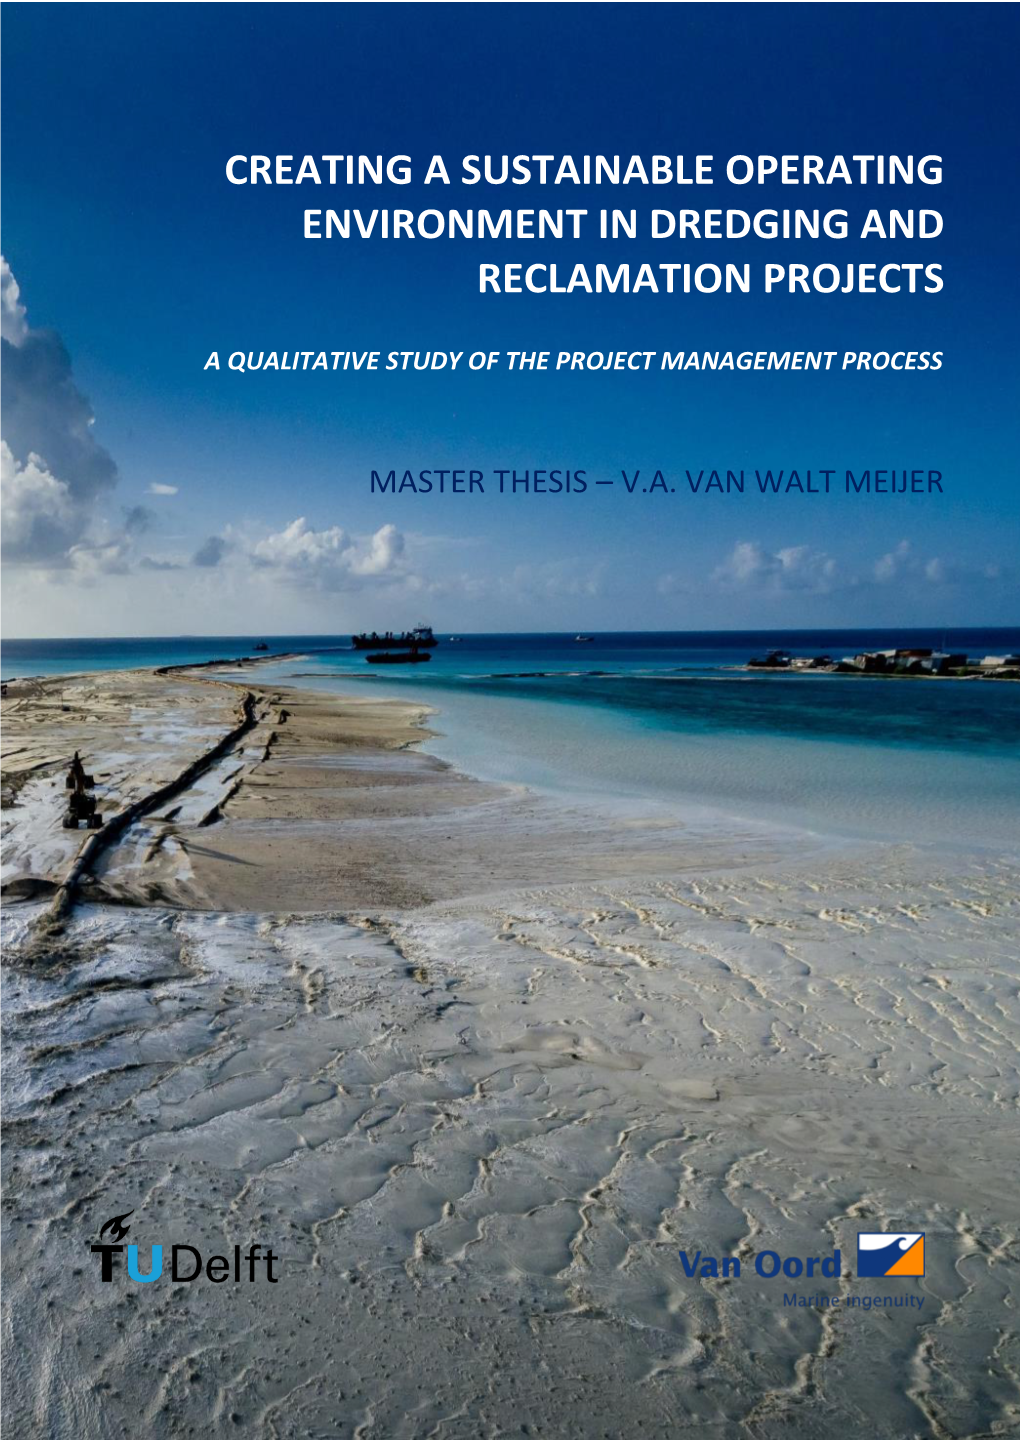 Creating a Sustainable Operating Environment in Dredging and Reclamation Projects